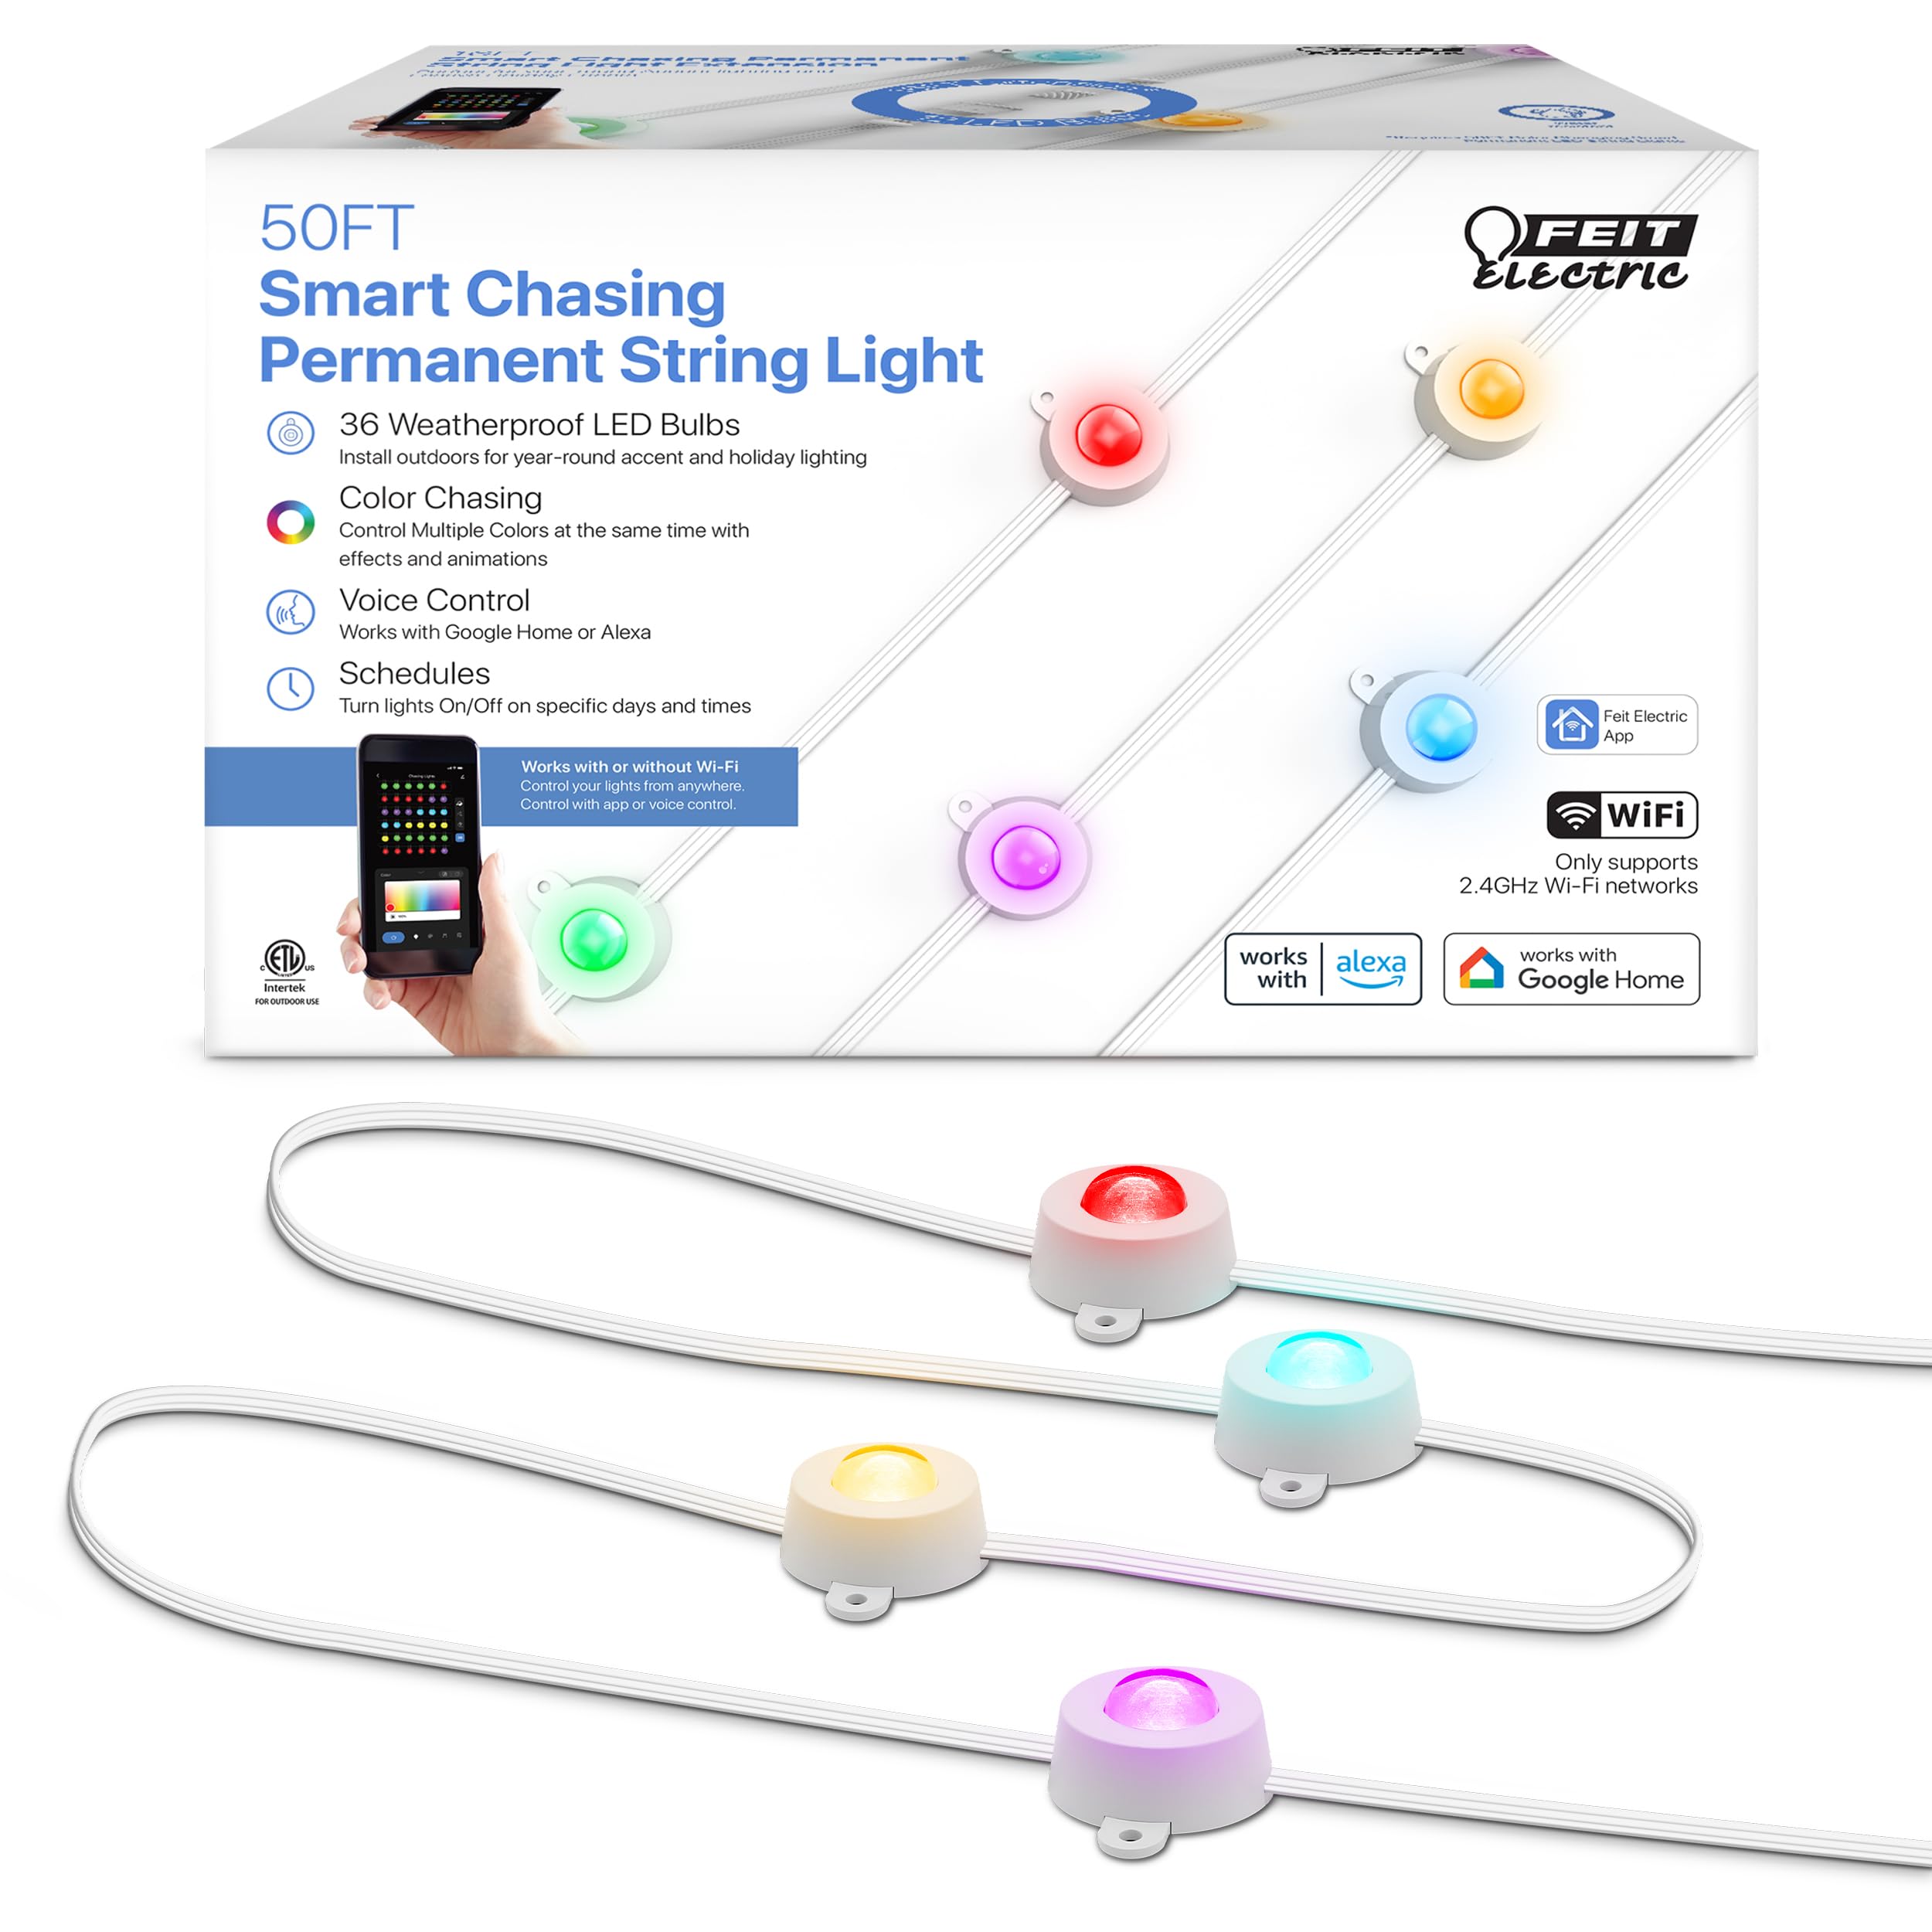 Feit Electric Permanent Outdoor Lights, Smart RGBIC String Lights, 50FT LED Christmas Lights, 2.4GHz WiFi-Enabled Under Eave Light, Work with Alexa and Google Assistant, Weather Proof, SL50-36/RGB/AG